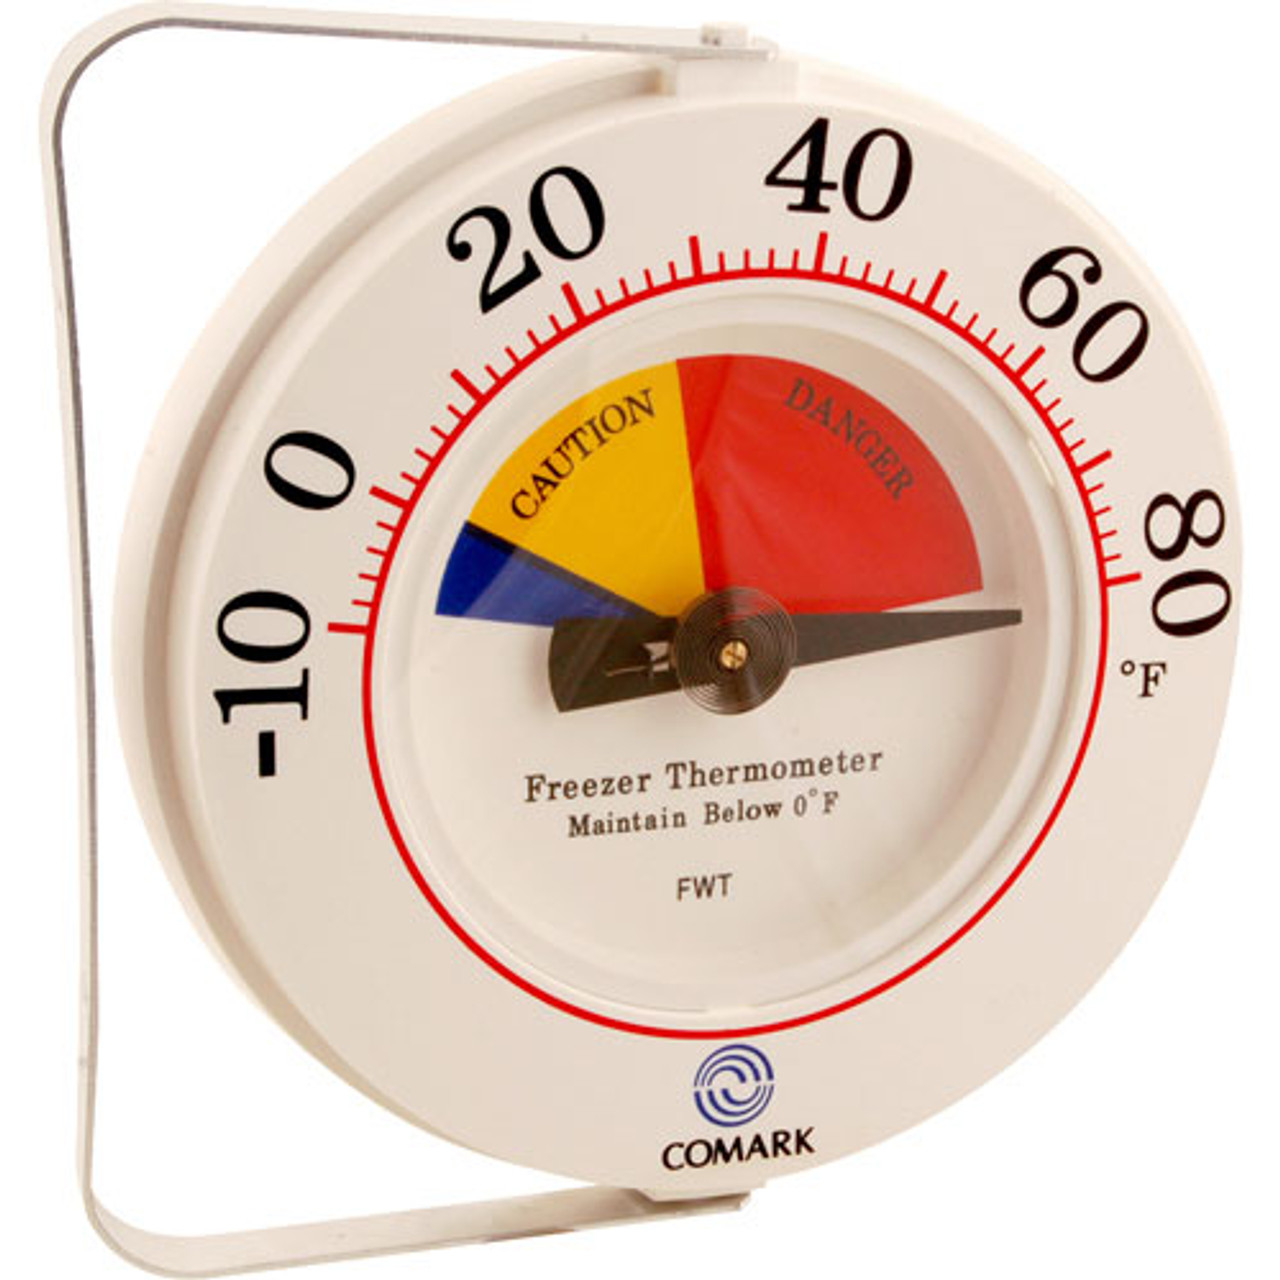 Thermometer Freezer 6" - Replacement Part For Comark FWT